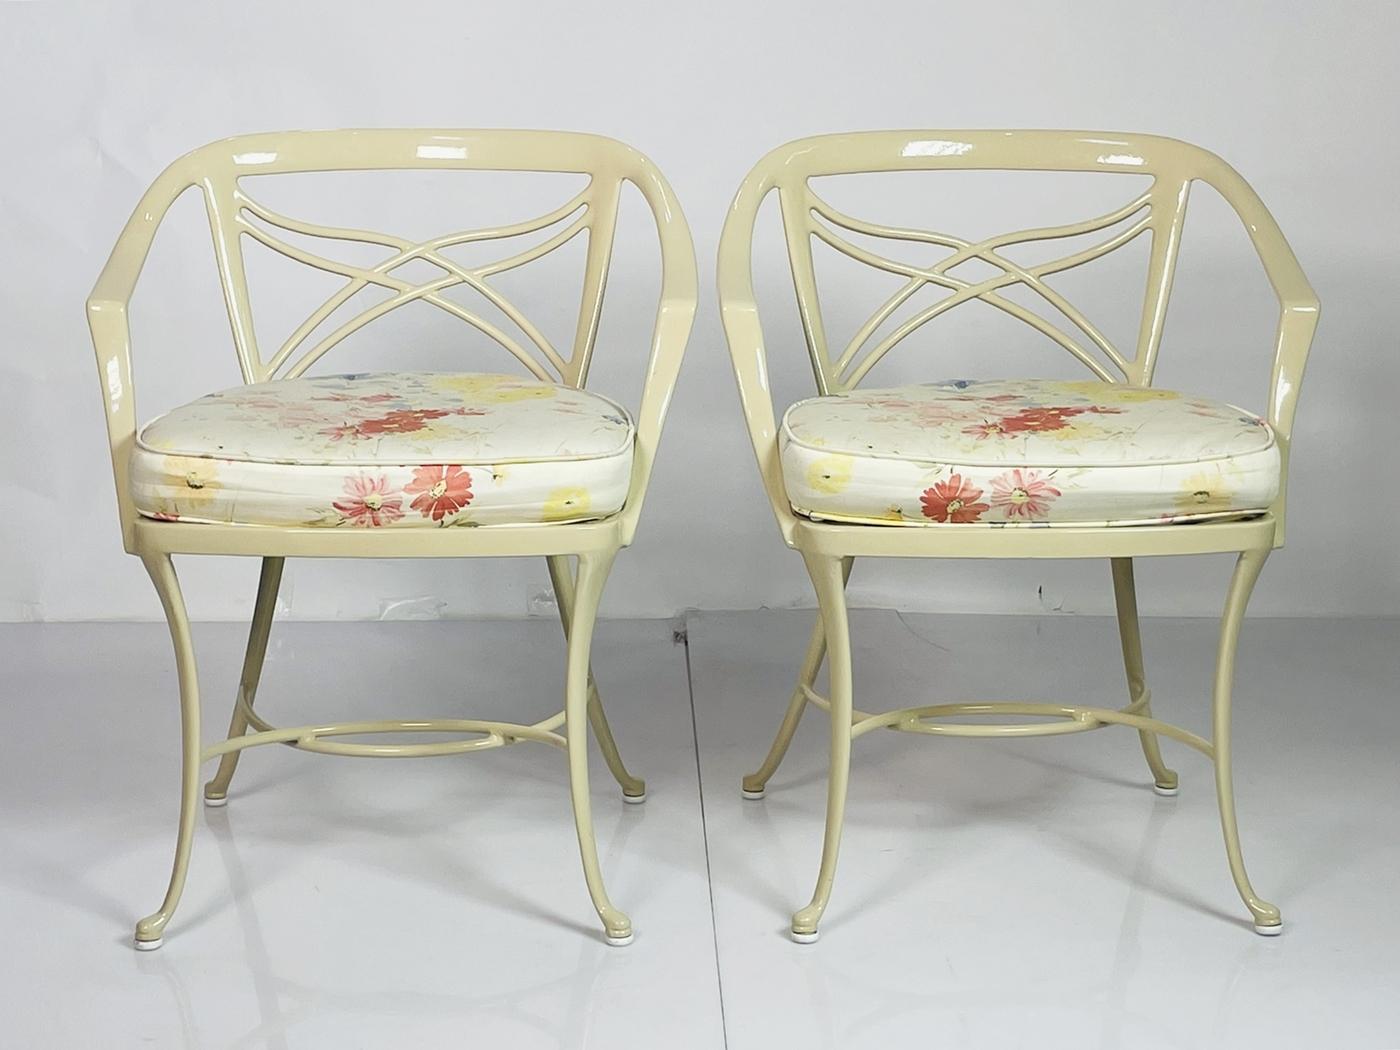 Vintage Dining Set - Four Armchairs & Table - by Brown-Jordan, USA 1970's For Sale 5